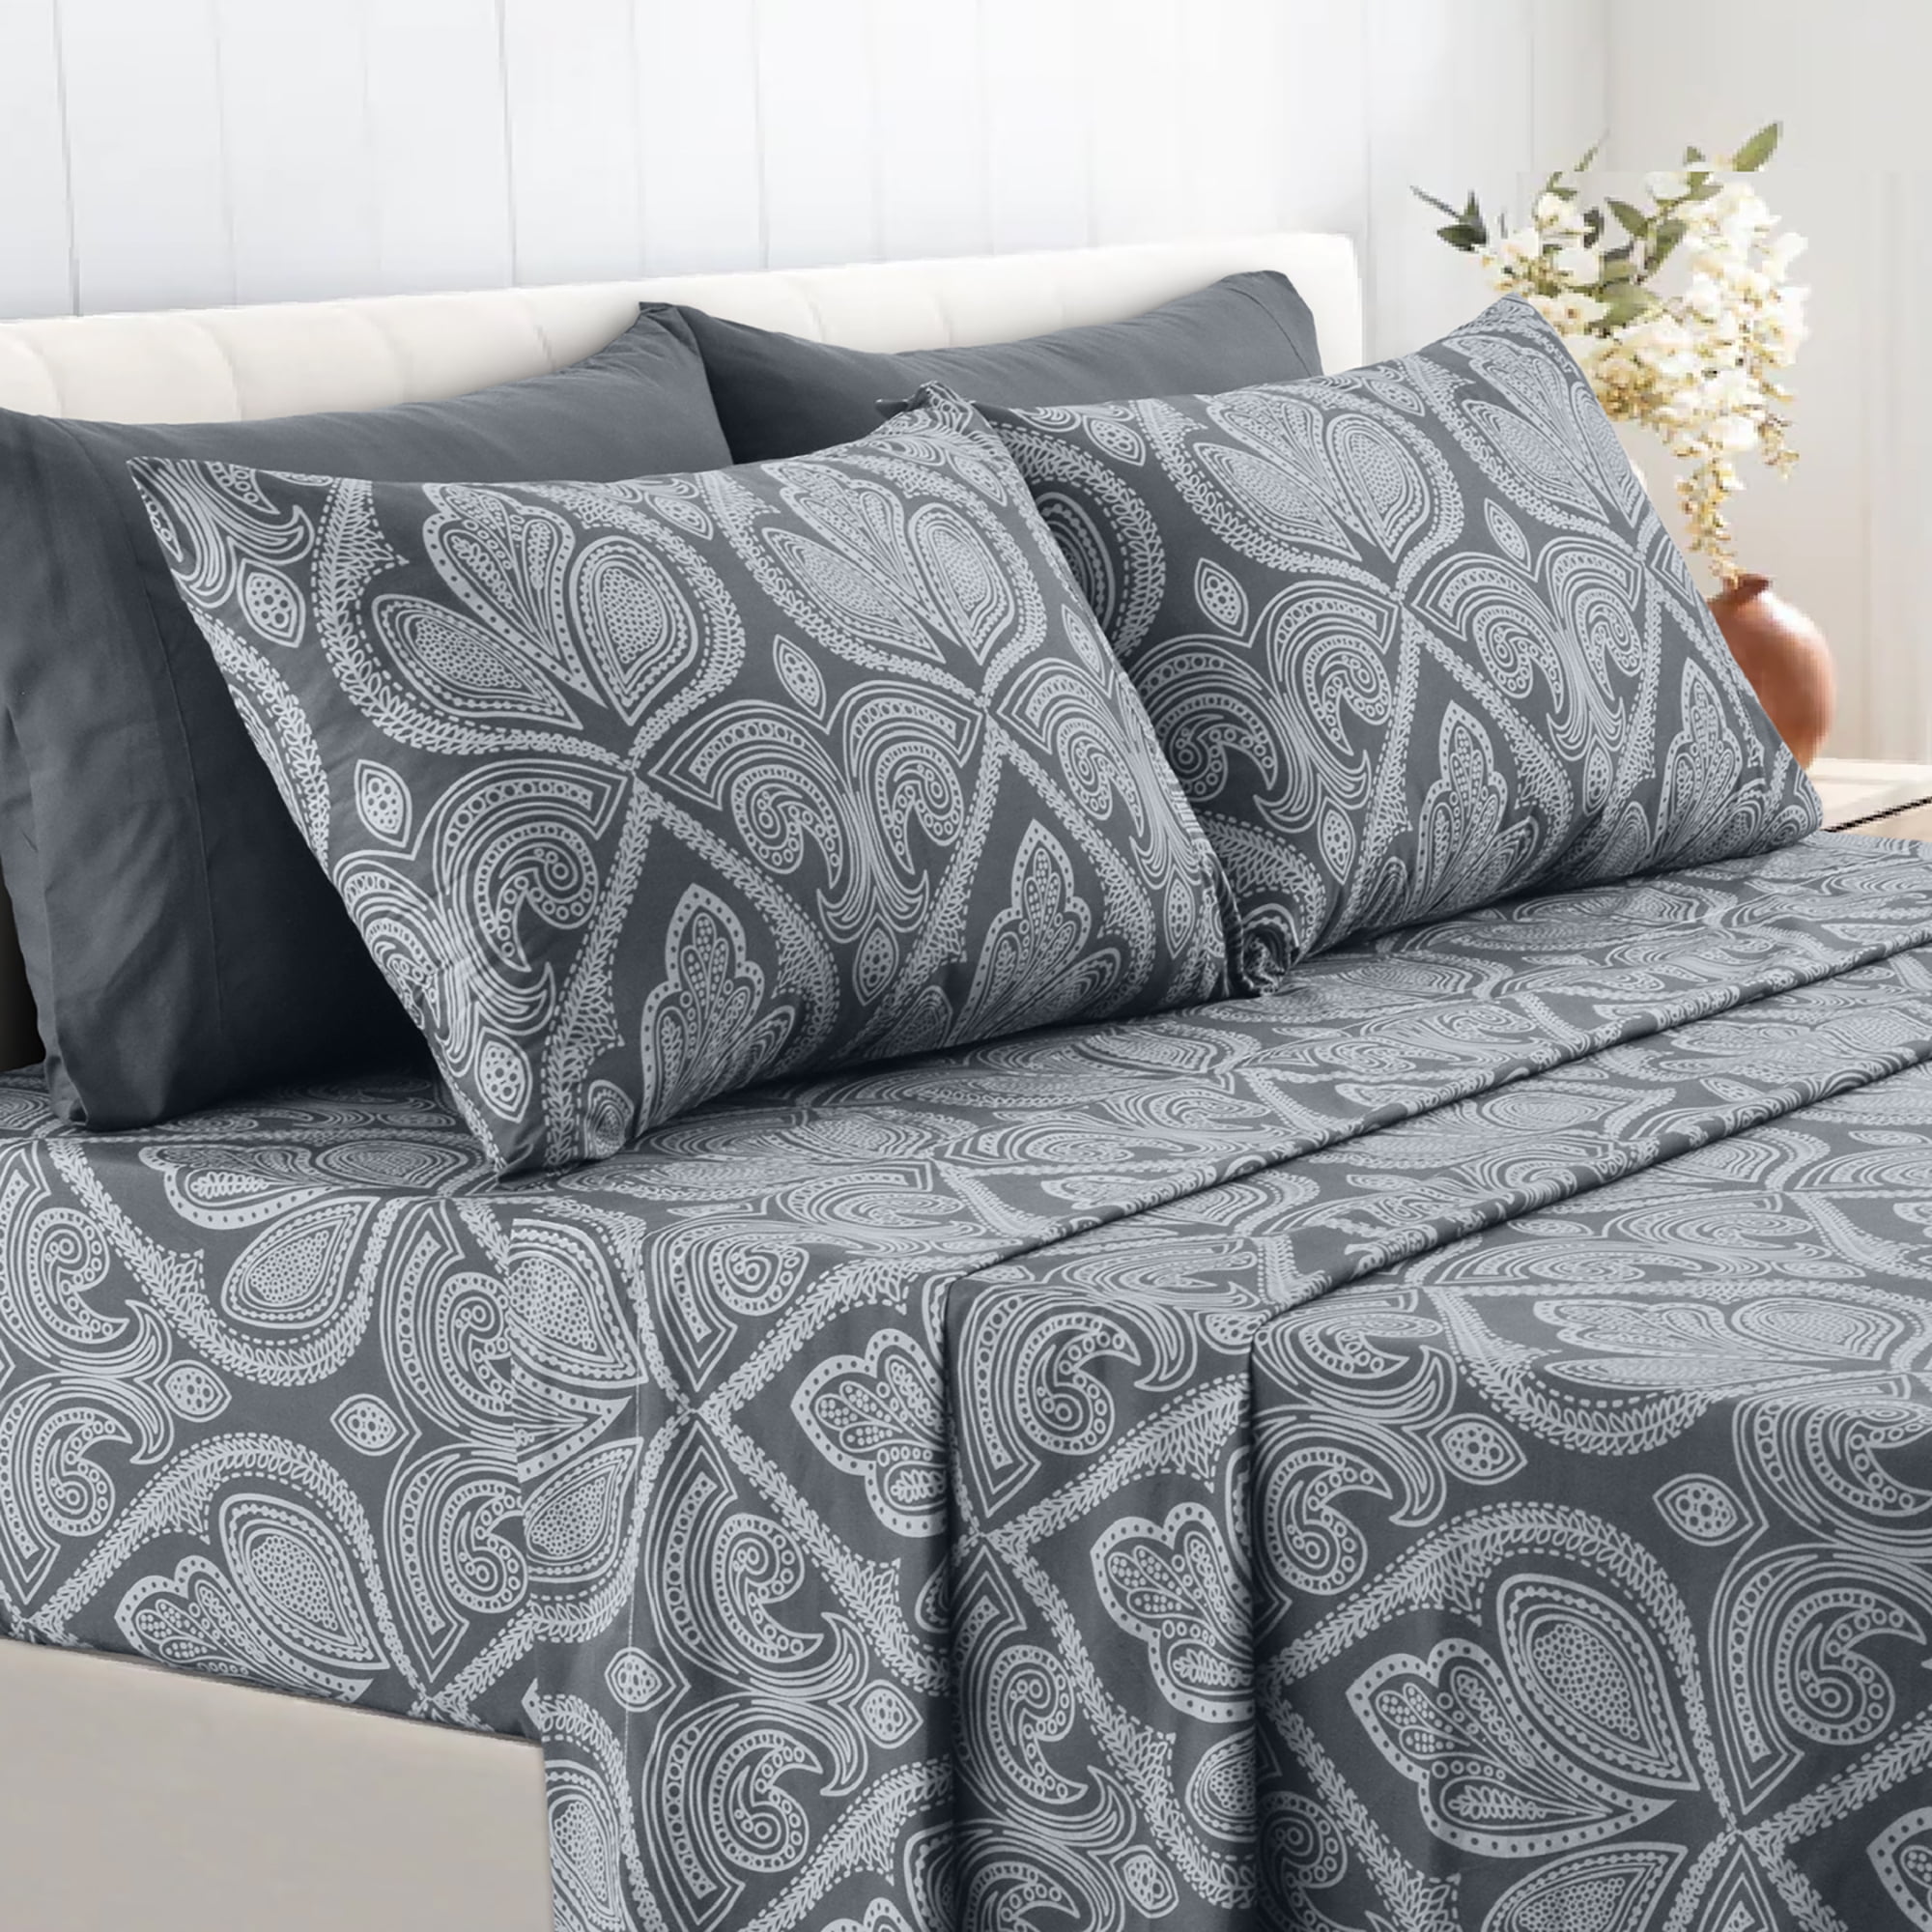 Details about   Solid Microfiber Decorative Bed Set with Throw Twin XL Full Queen King Quilted 